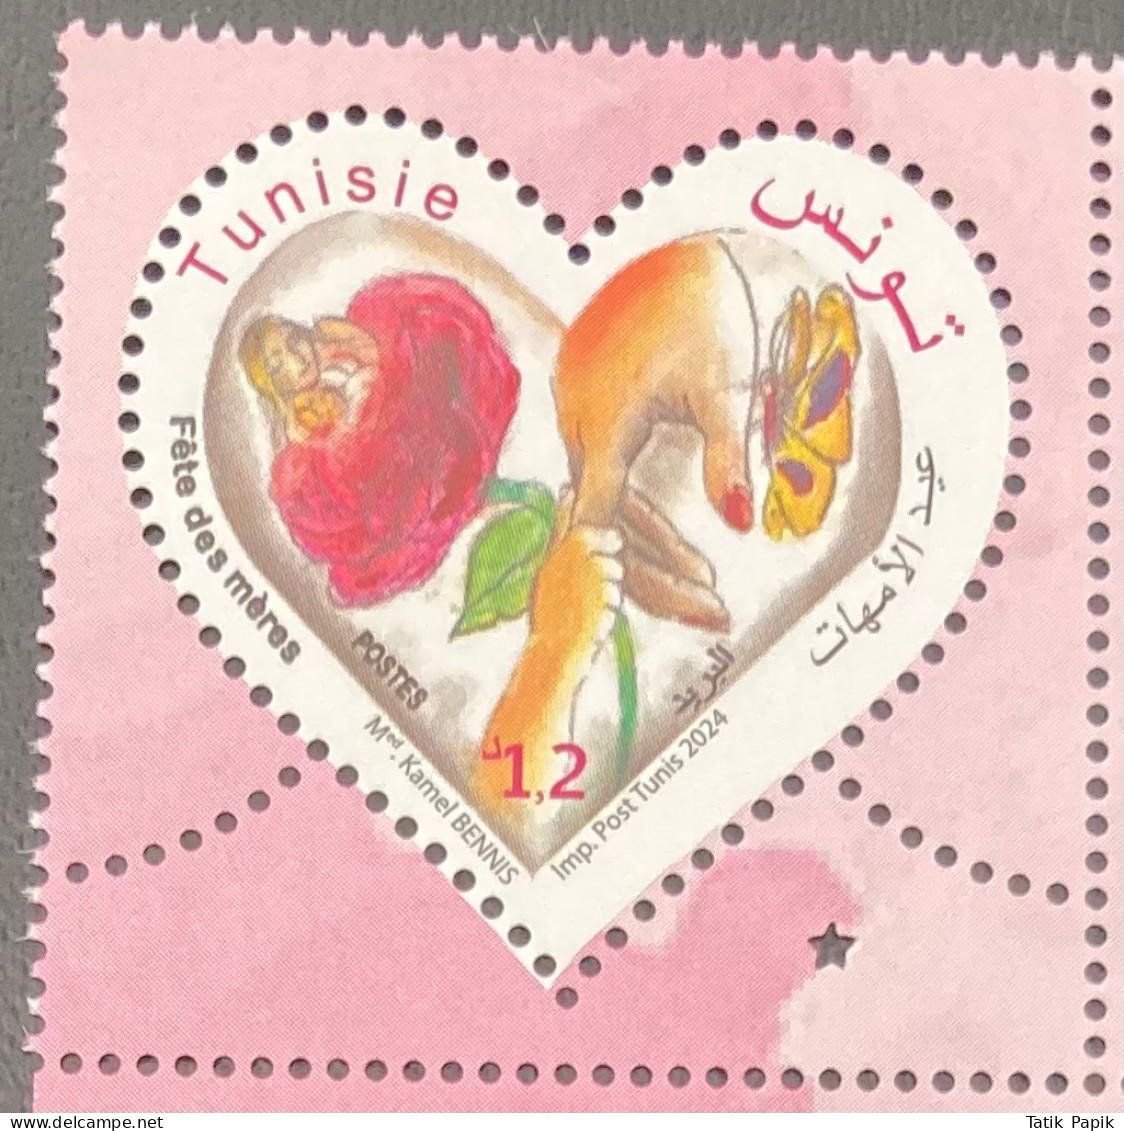 2024 Tunisie Tunisia Fête Mère Mother Day Heart Rose Odd Shaped Stamp New Superb - Tunisie (1956-...)